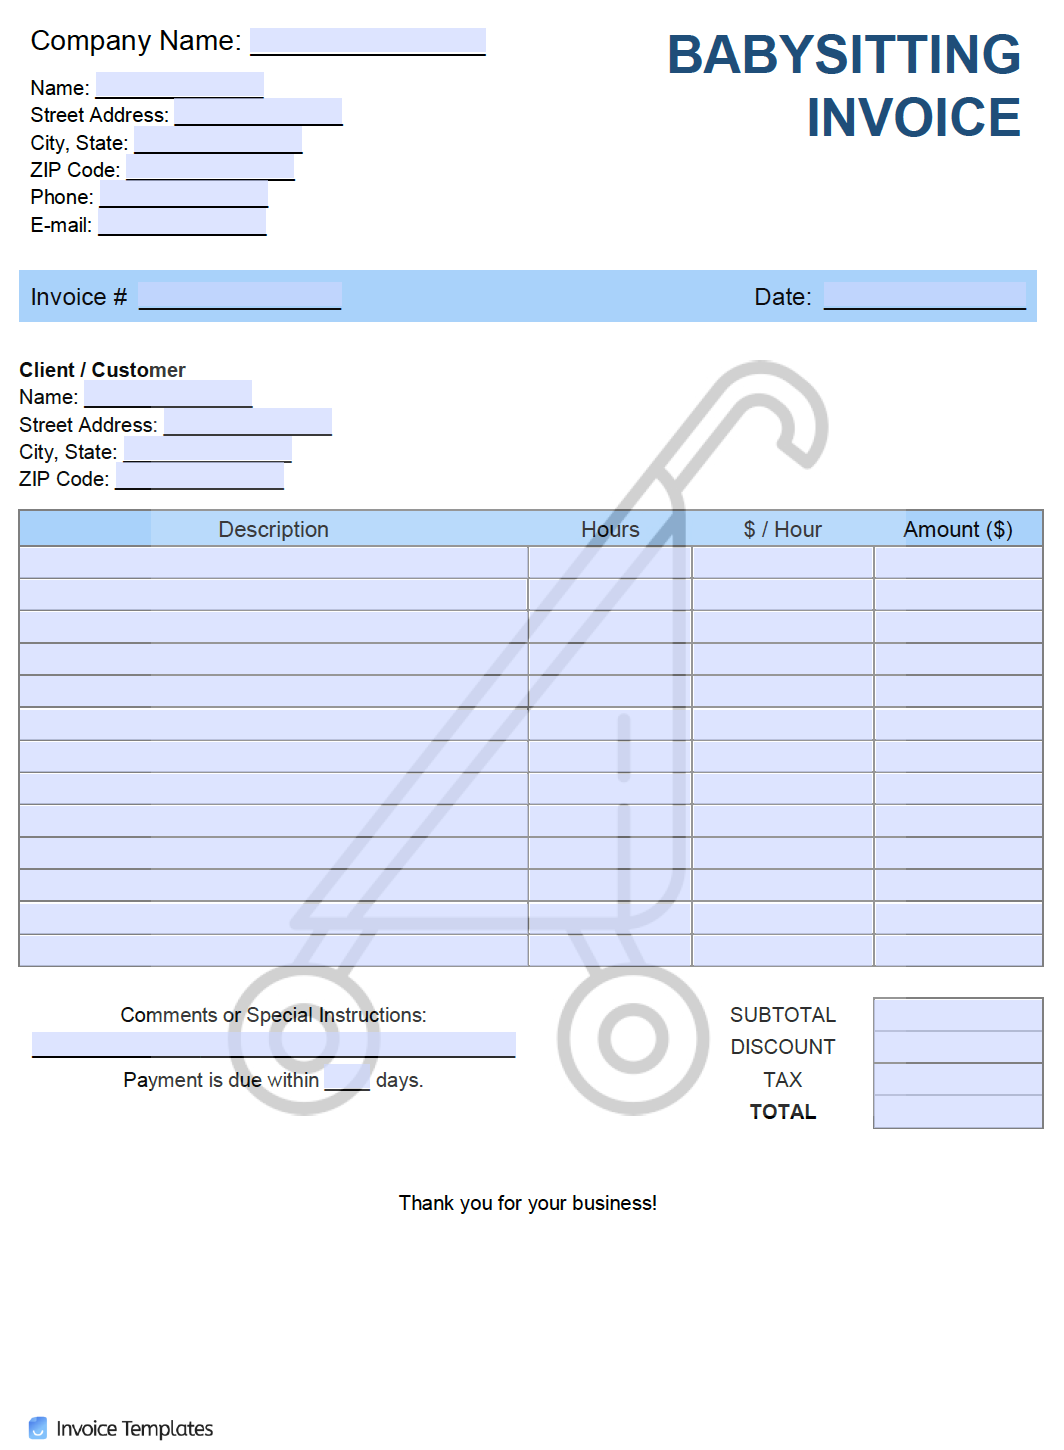 Free Babysitting (Nanny) Invoice Template  PDF  WORD  EXCEL Intended For Nanny Notes Template